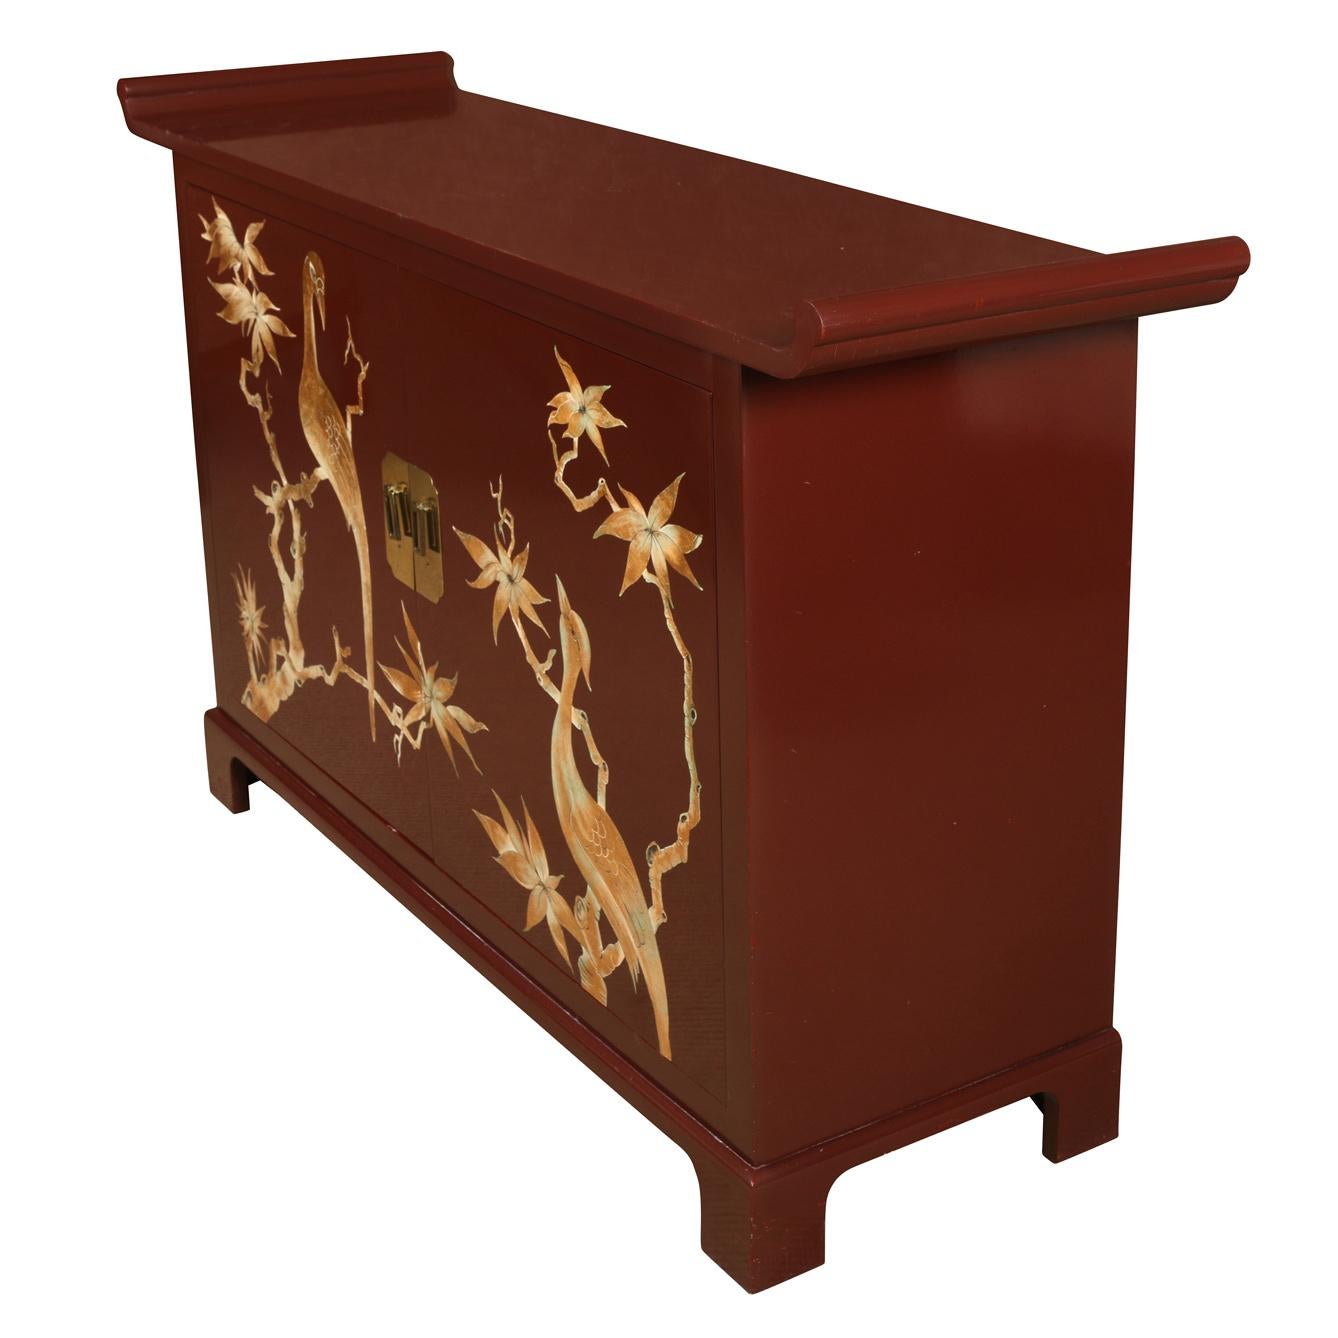 A vintage James Mont style, Asian inspired,  sideboard in a wine hue with brass details, depicting birds, tree branches and leaves.  Two doors open to reveal two large shelves for storage